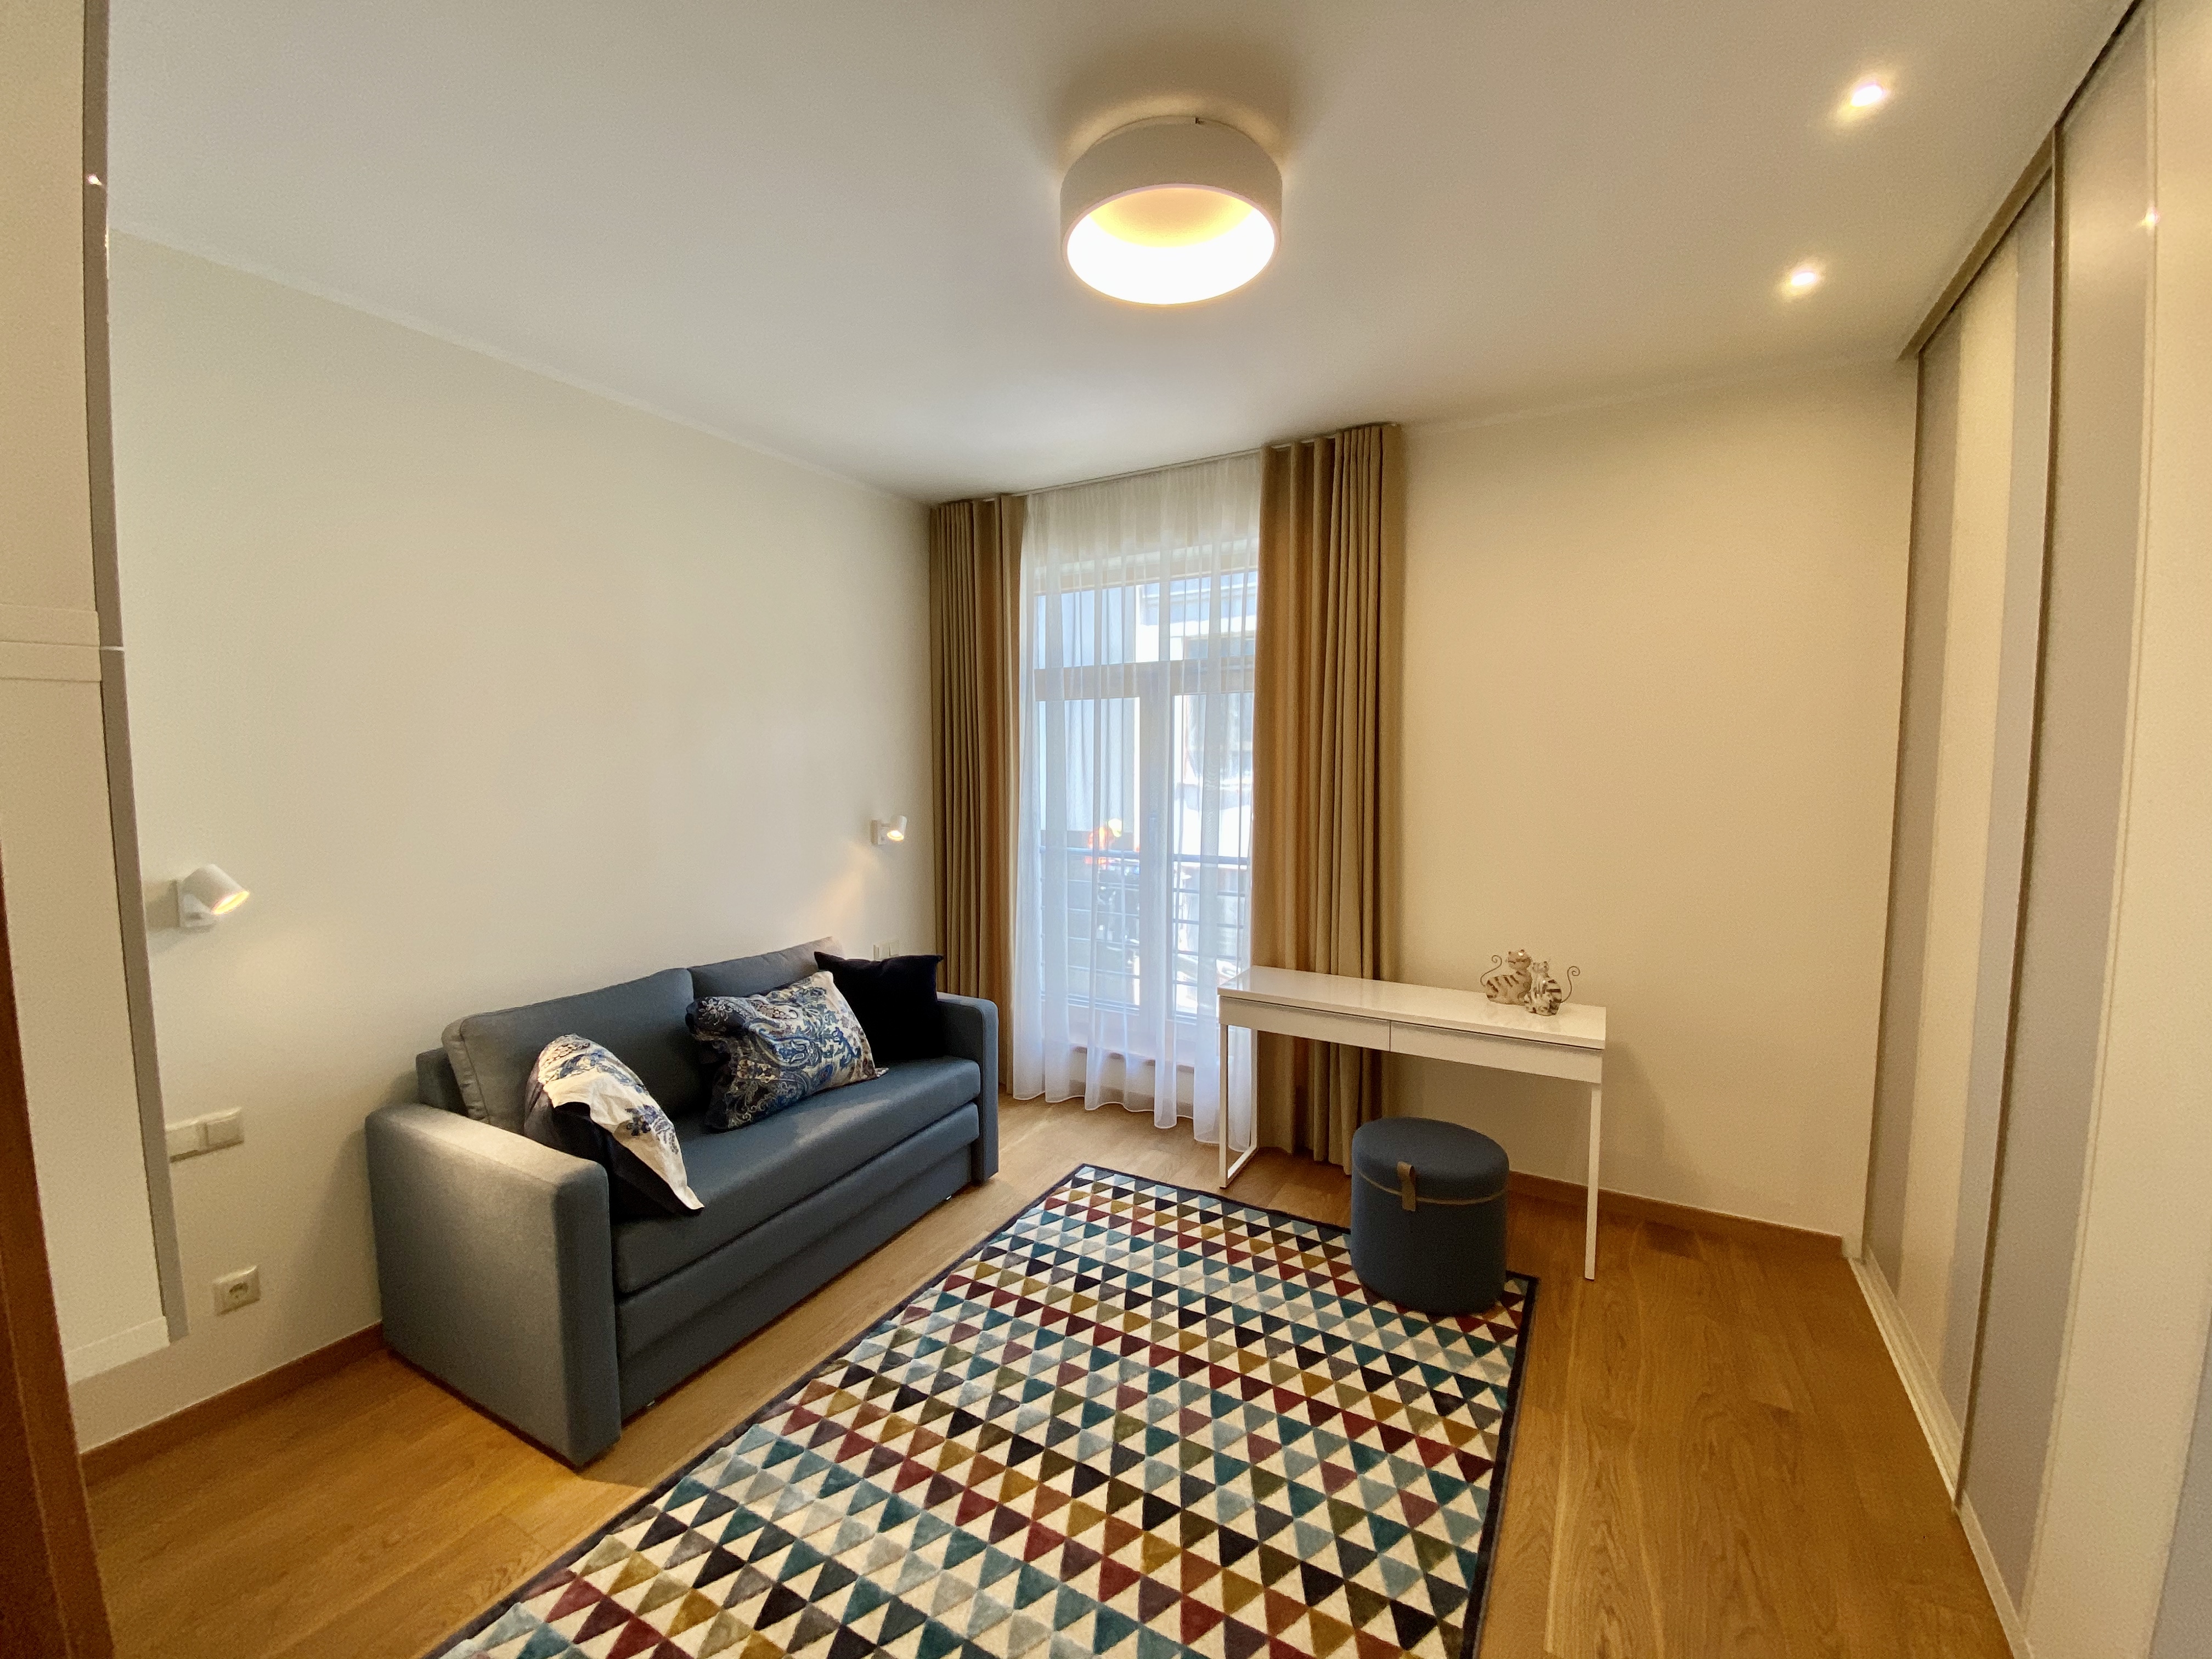 Apartment for rent, Citadeles street 6 - Image 1